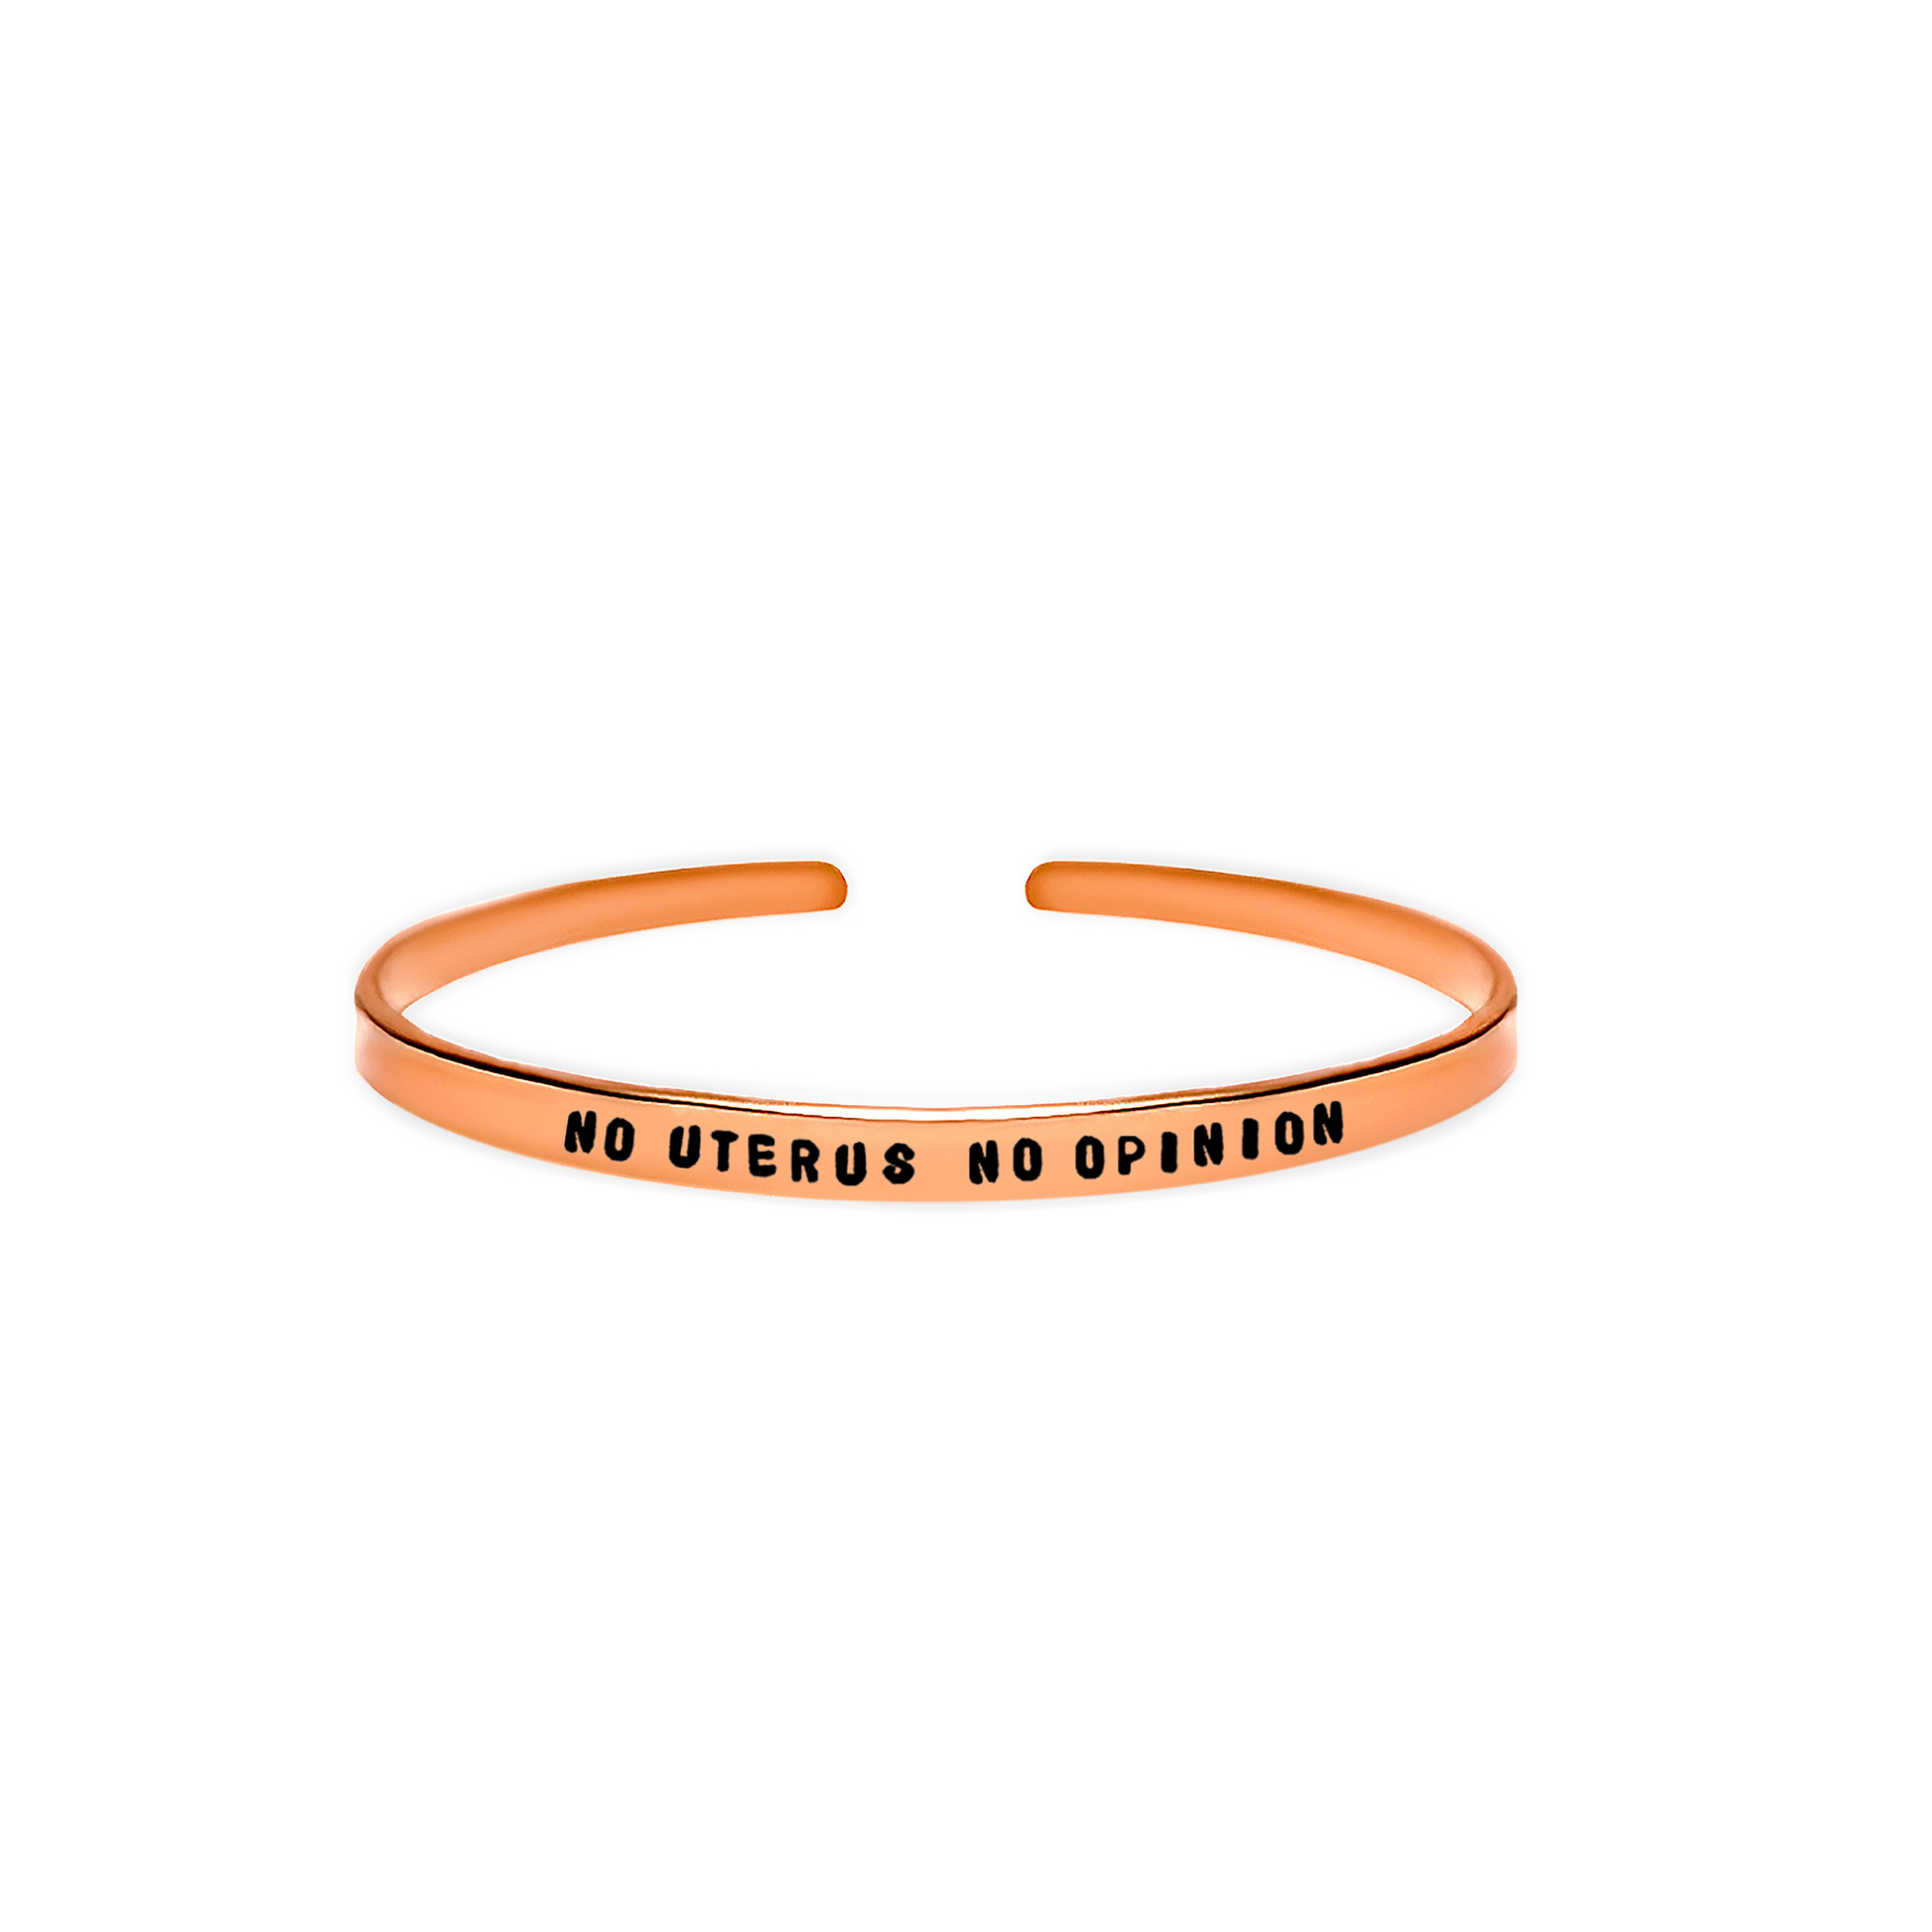 ‘No uterus, no opinion’ gender equality and women's rights quote  cuff bracelet 